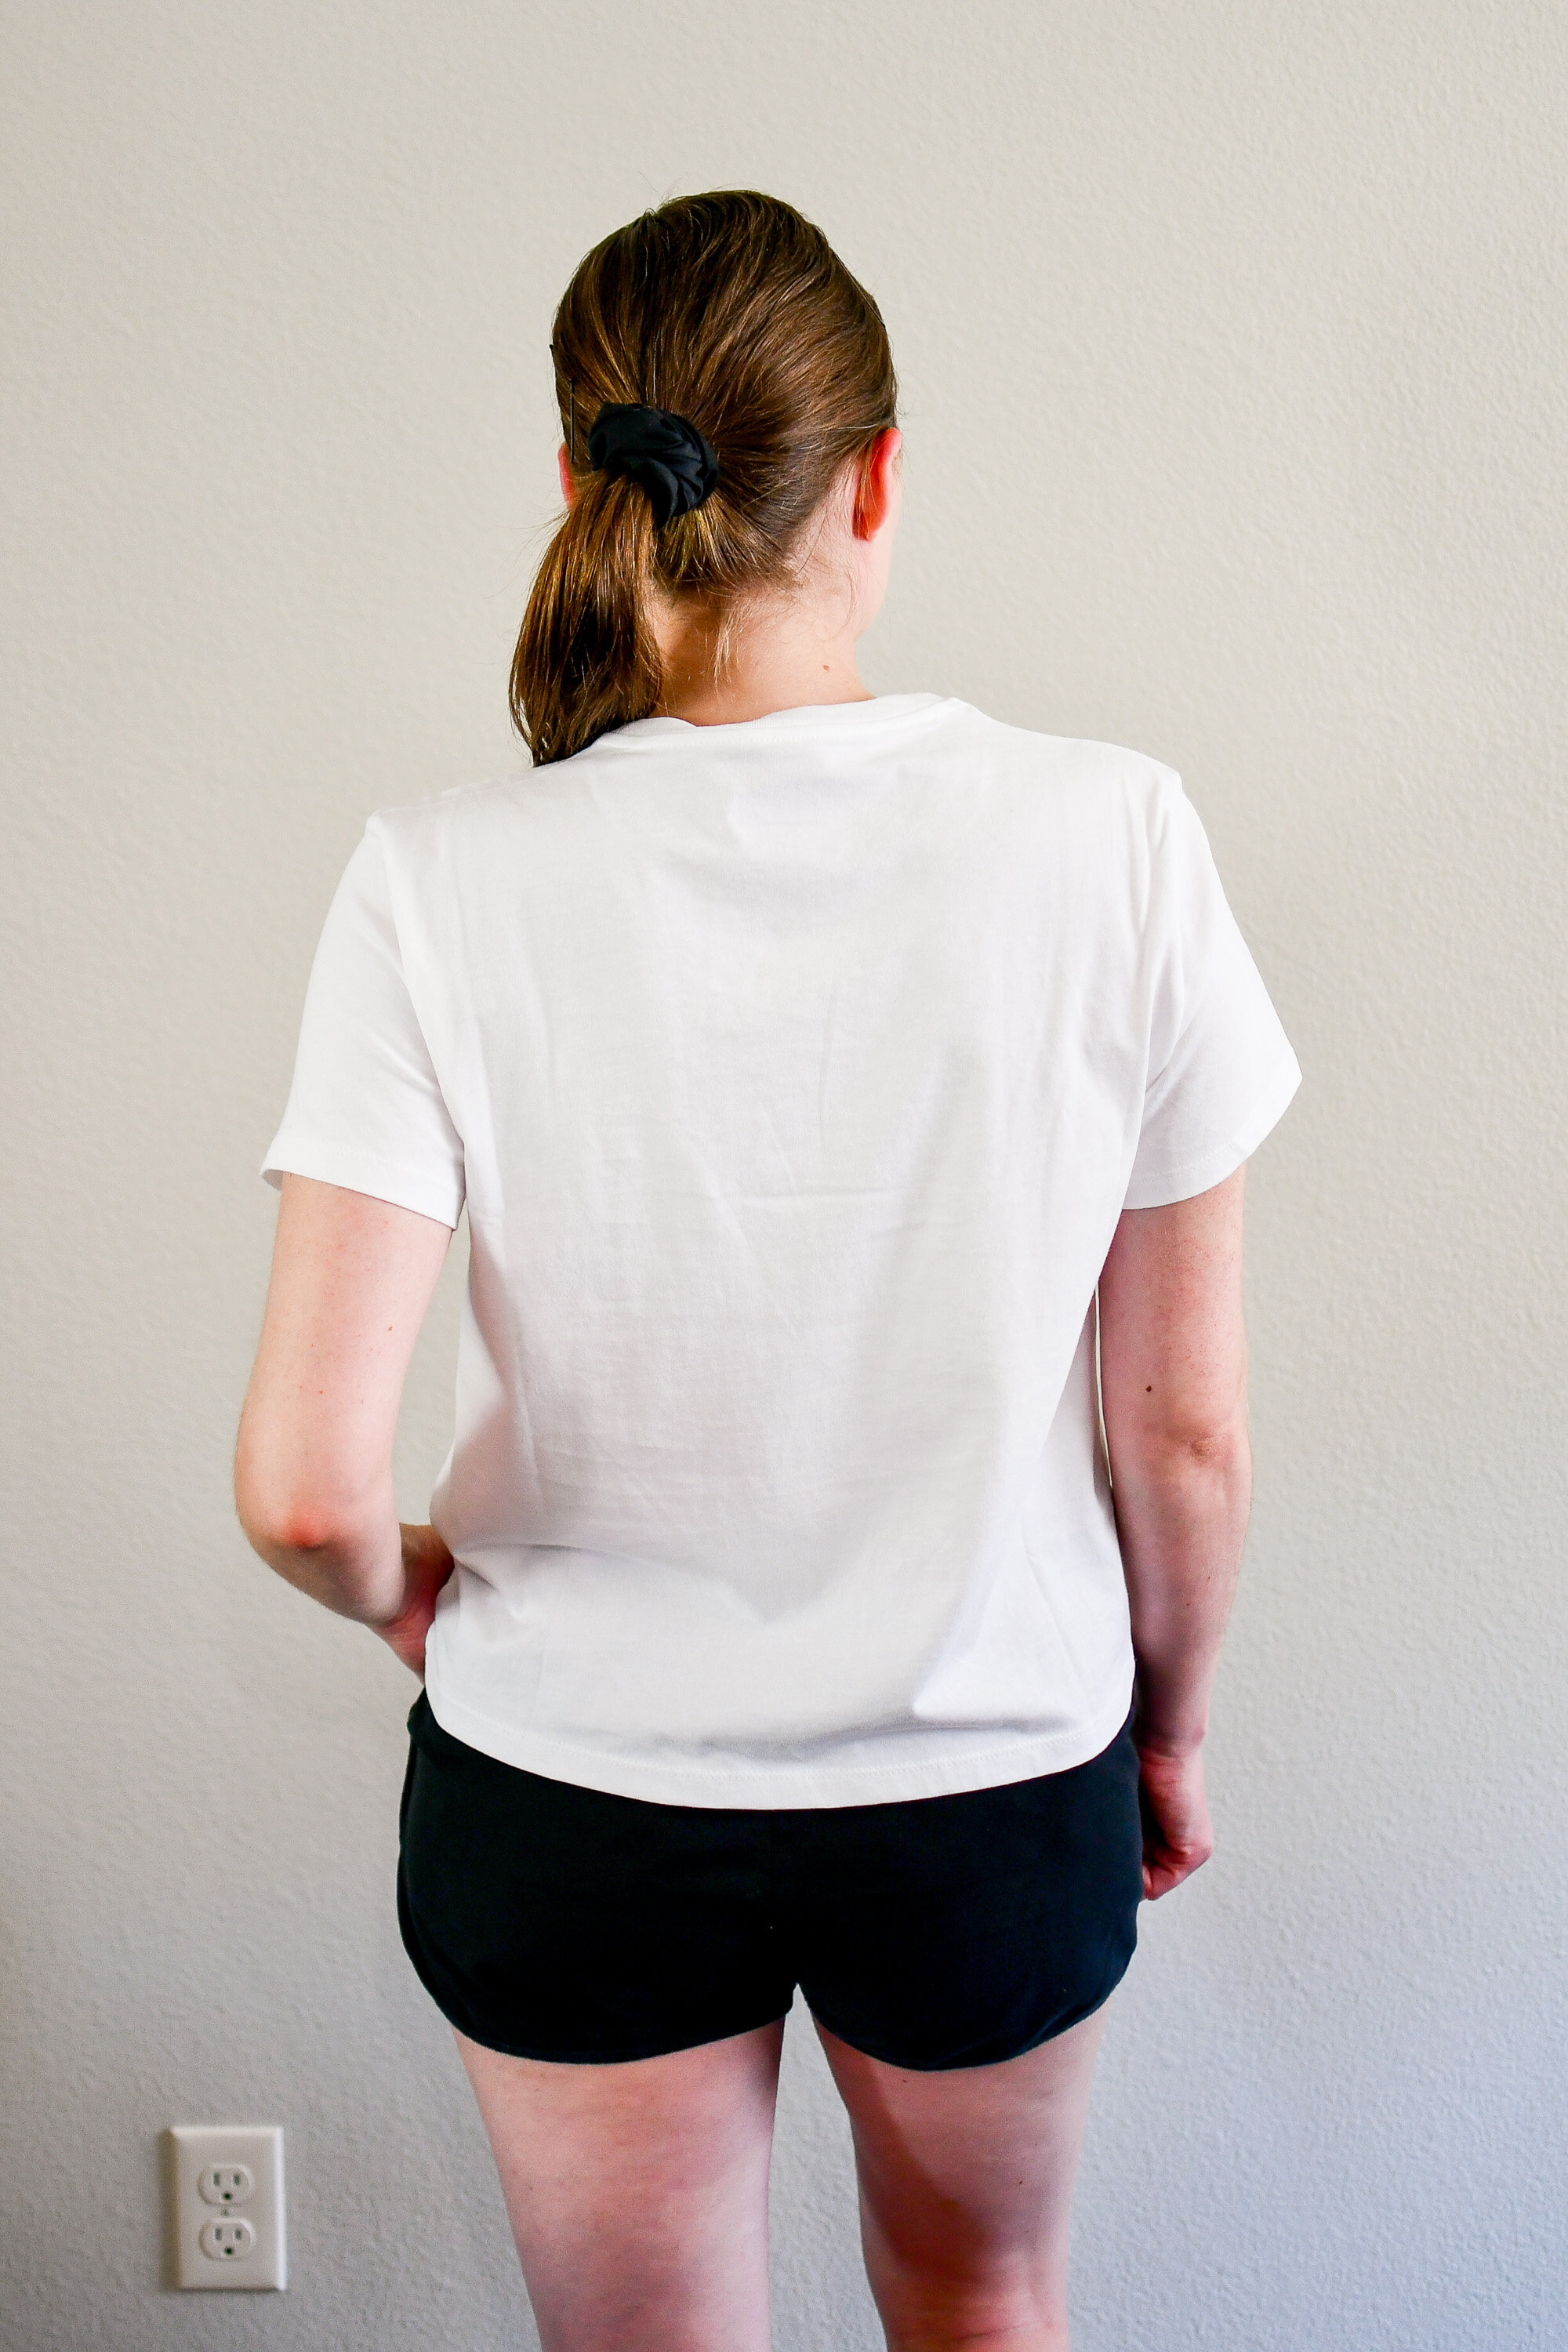 Everlane Reviews: Organic and Silky Cotton Tees, Easy Short